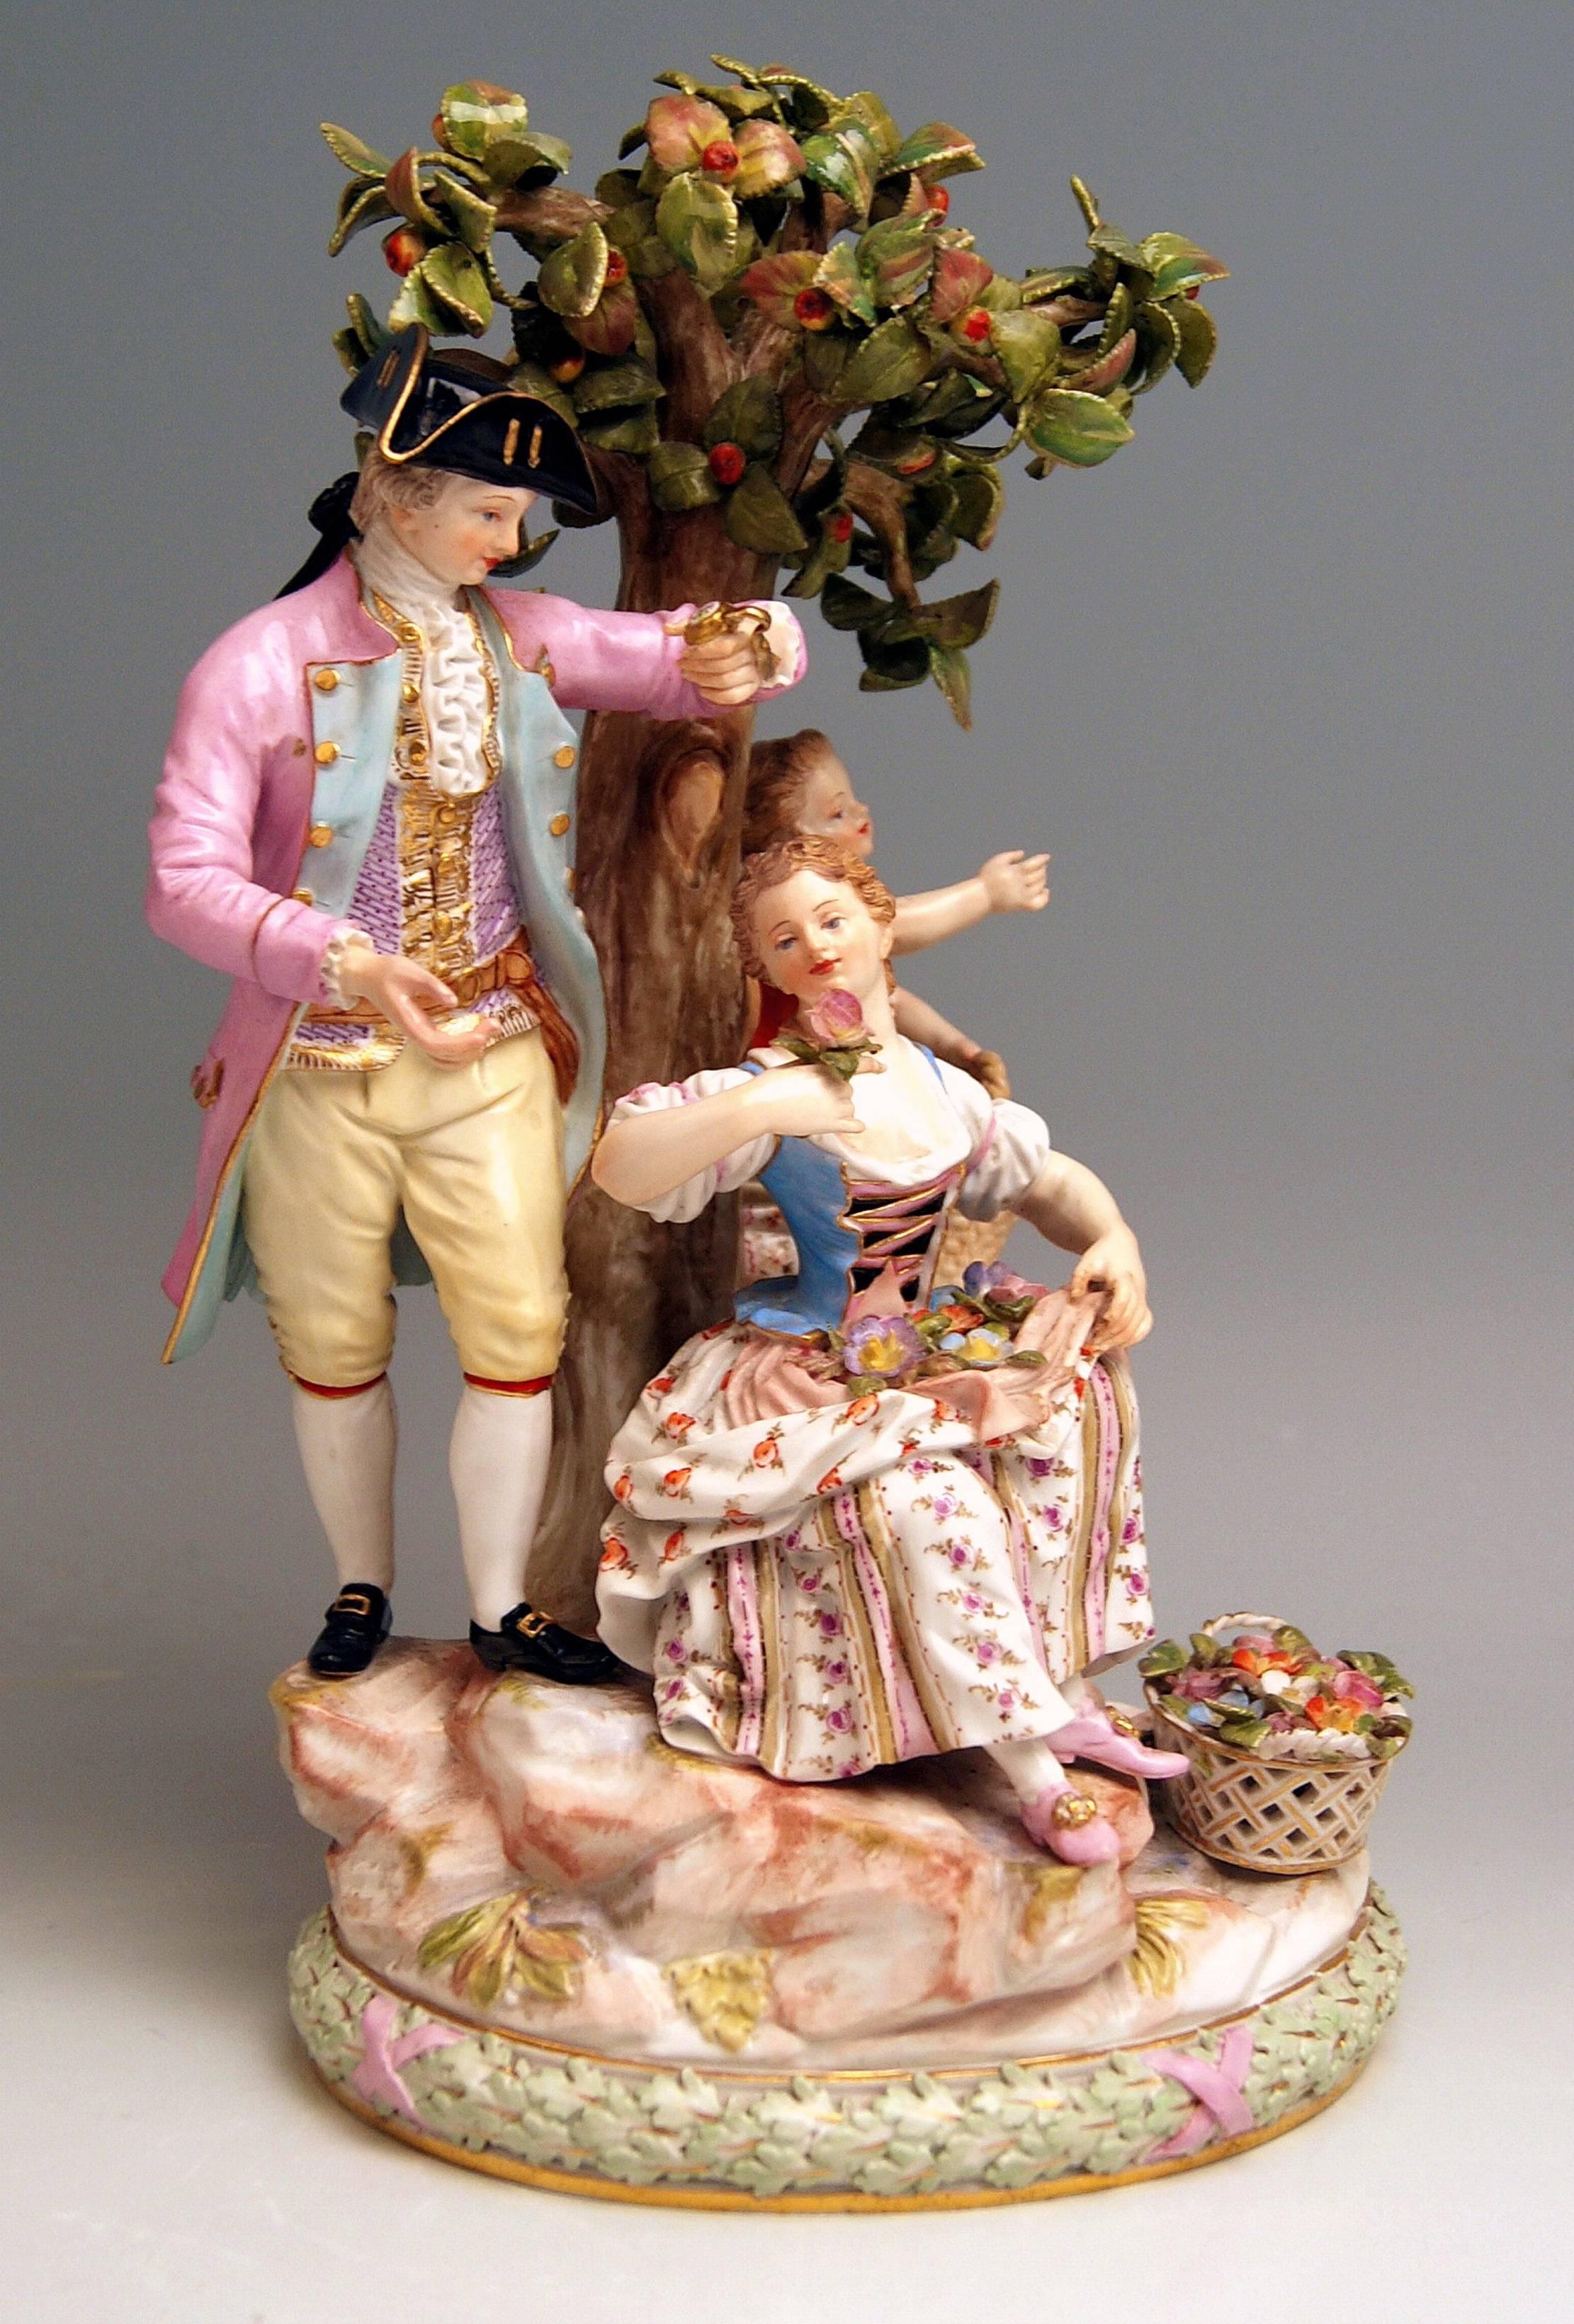 Meissen Figurine Group: The Apple Harvest 

Manufactory: Meissen
Hallmarked: Blue Meissen Sword Mark with Pommels on Hilts
Model Number D 94
Former's Number 48
Painter's Number 43
First quality
Dating: made circa 1870 
Material: porcelain,